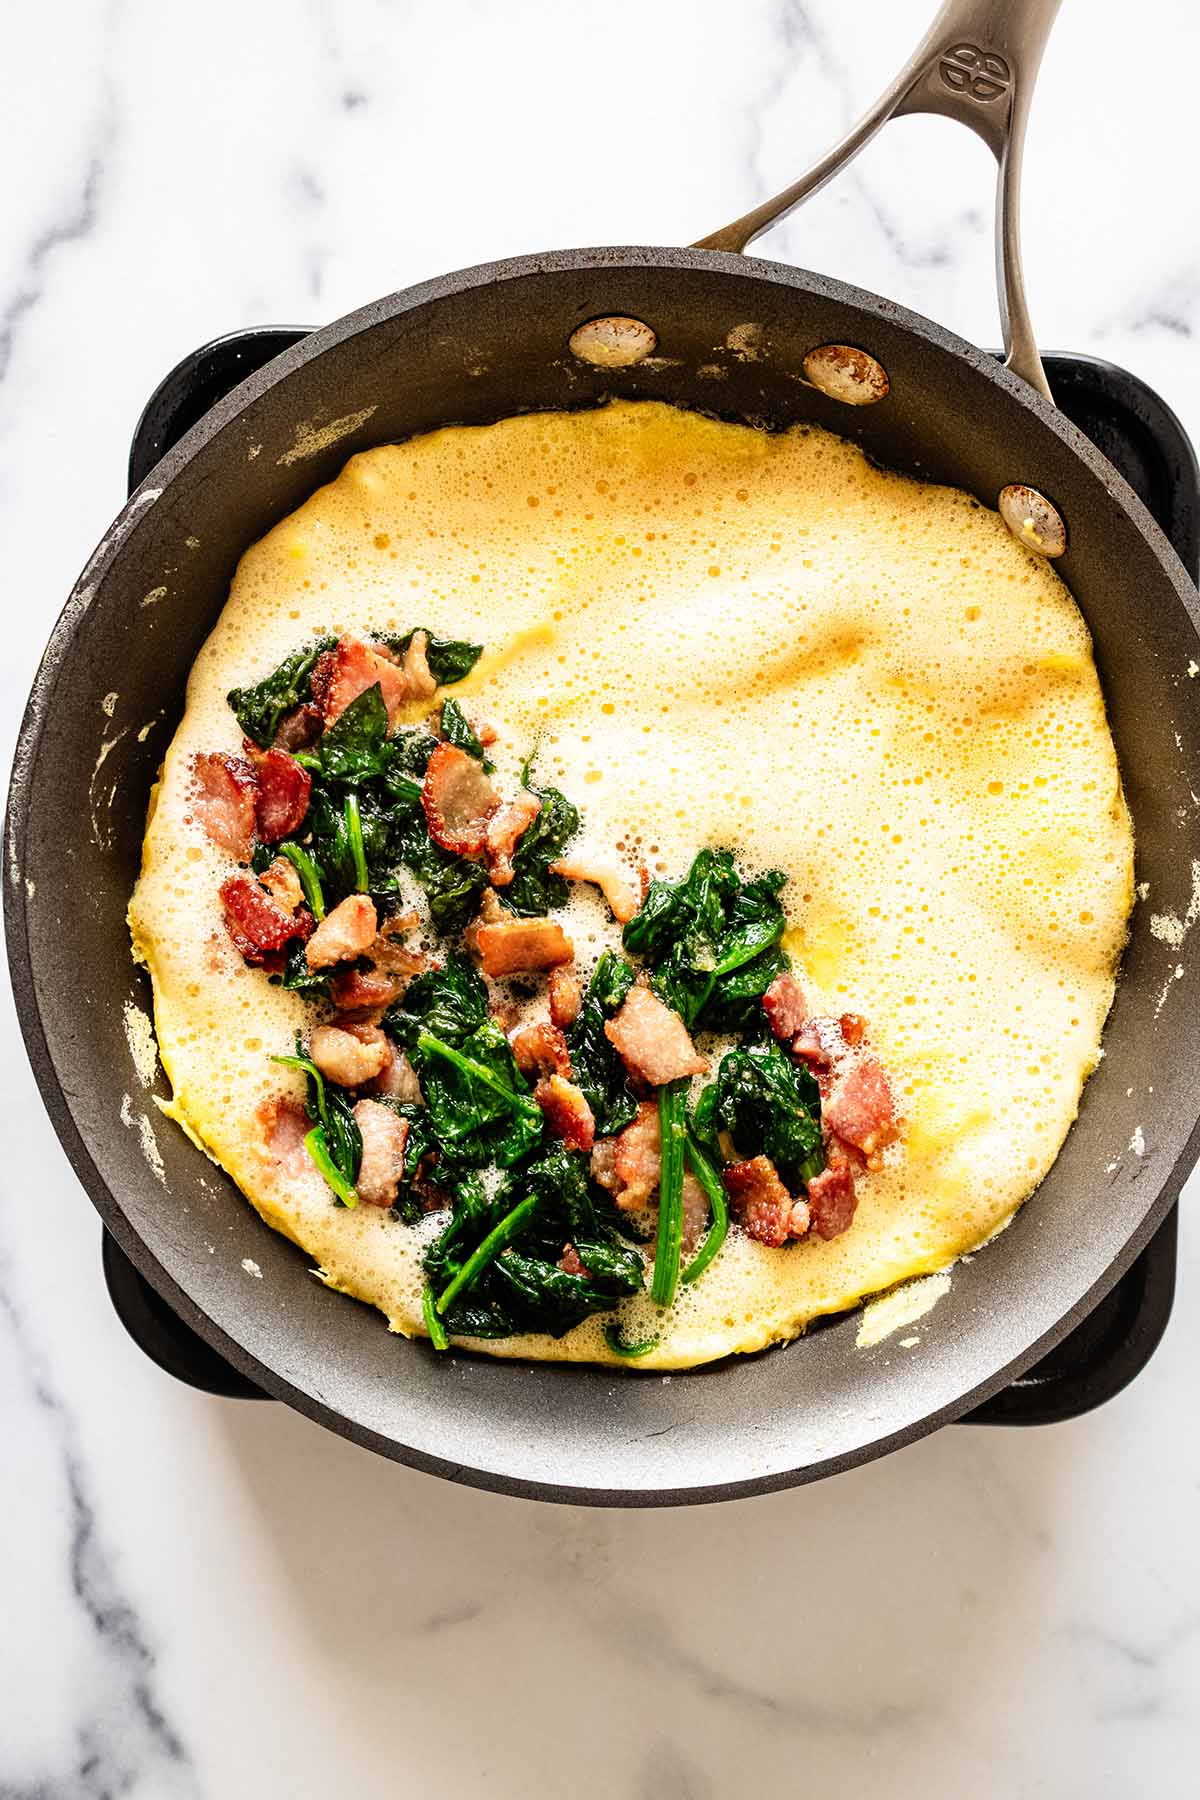 Spinach and bacon mixture on half of the omelette in a skillet